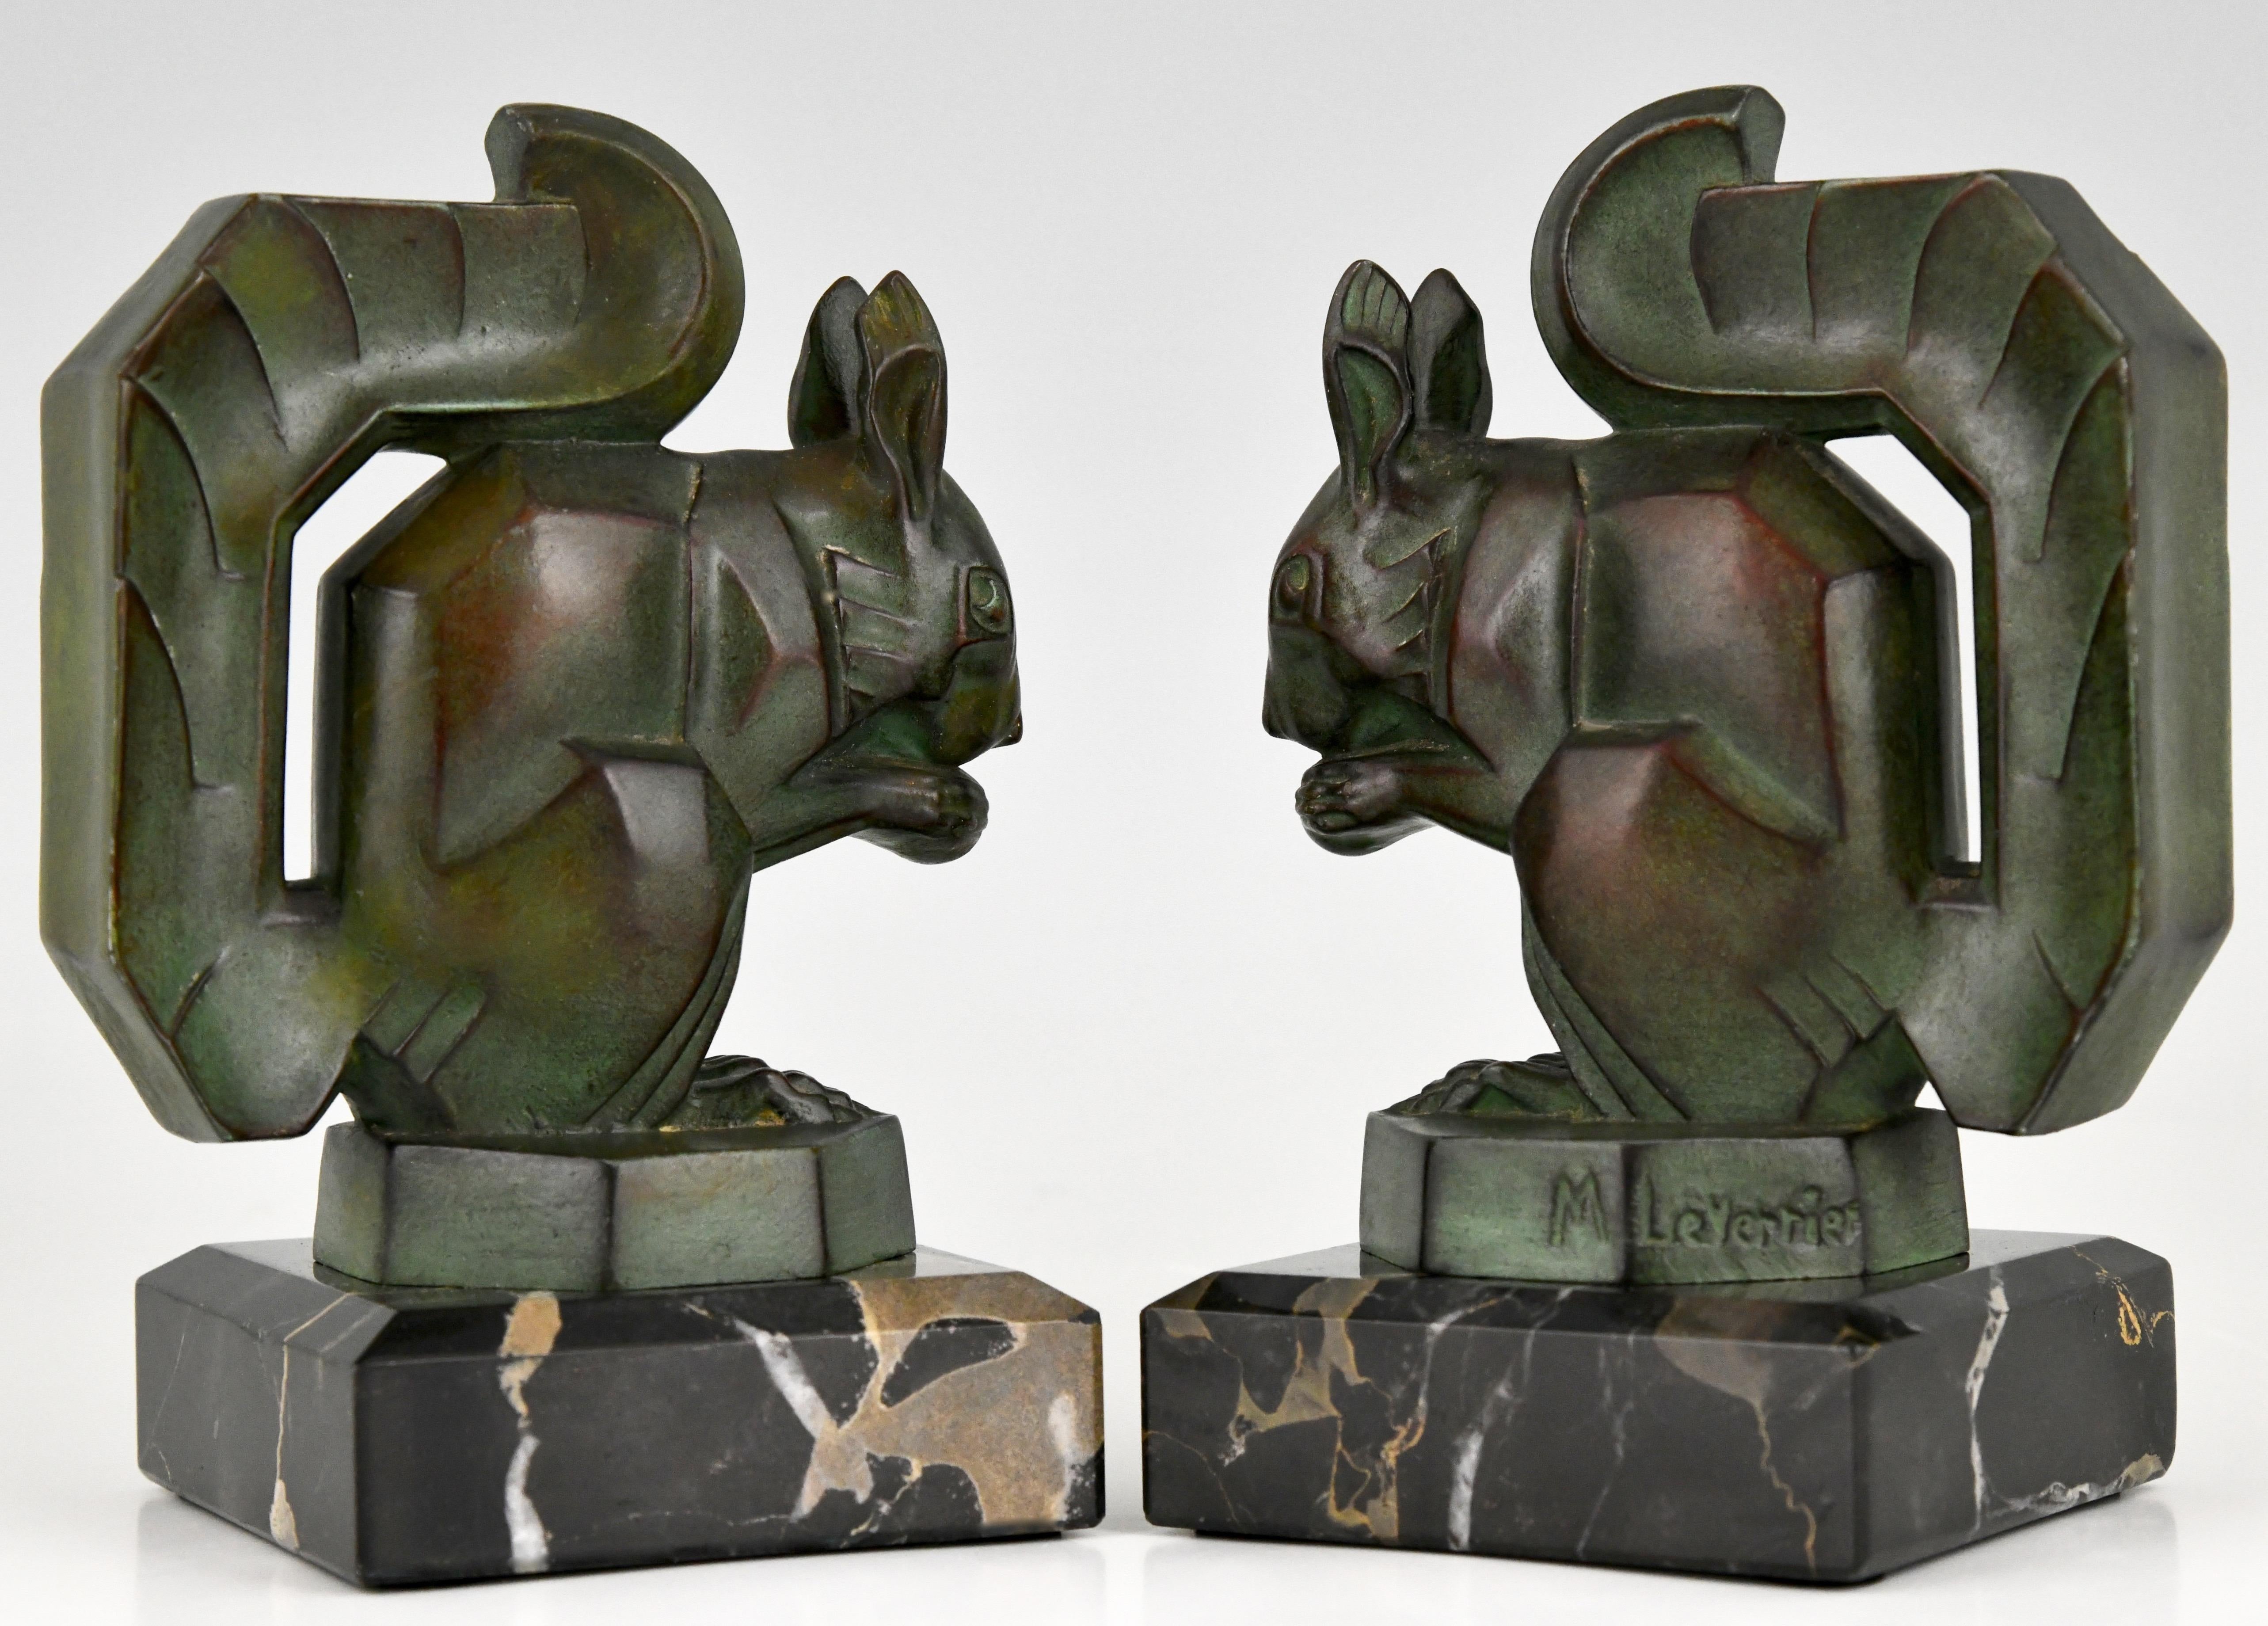 Art Deco bookends modelled as squirrels eating a nut signed by the French artist Max Le Verrier cast in art metal with lovely dark green patina on a Portor marble base, original ca. 1930.
“Art deco sculpture” by Victor Arwas, Academy.? “Bronzes,